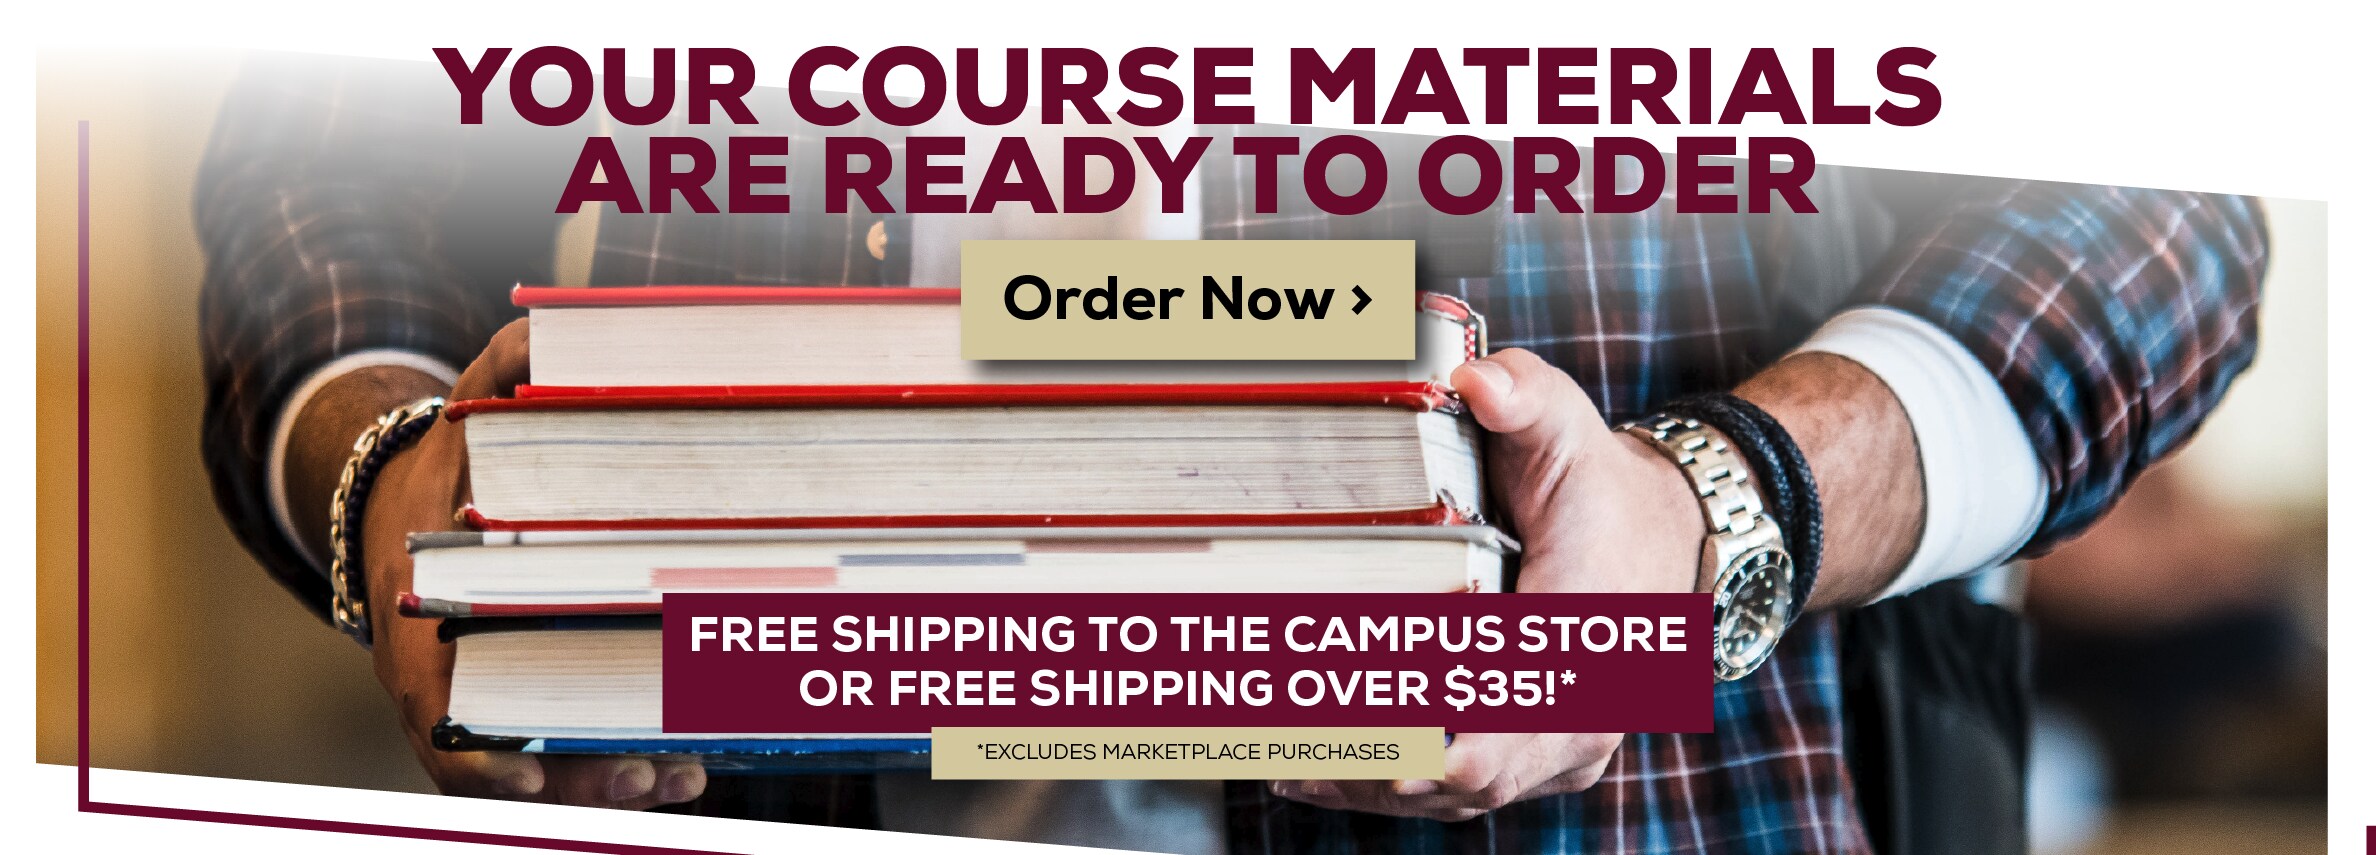 Your Course Materials are Ready to Order. Order Now. Free shipping on orders over $35 or to the campus store! *Excludes marketplace purchases.